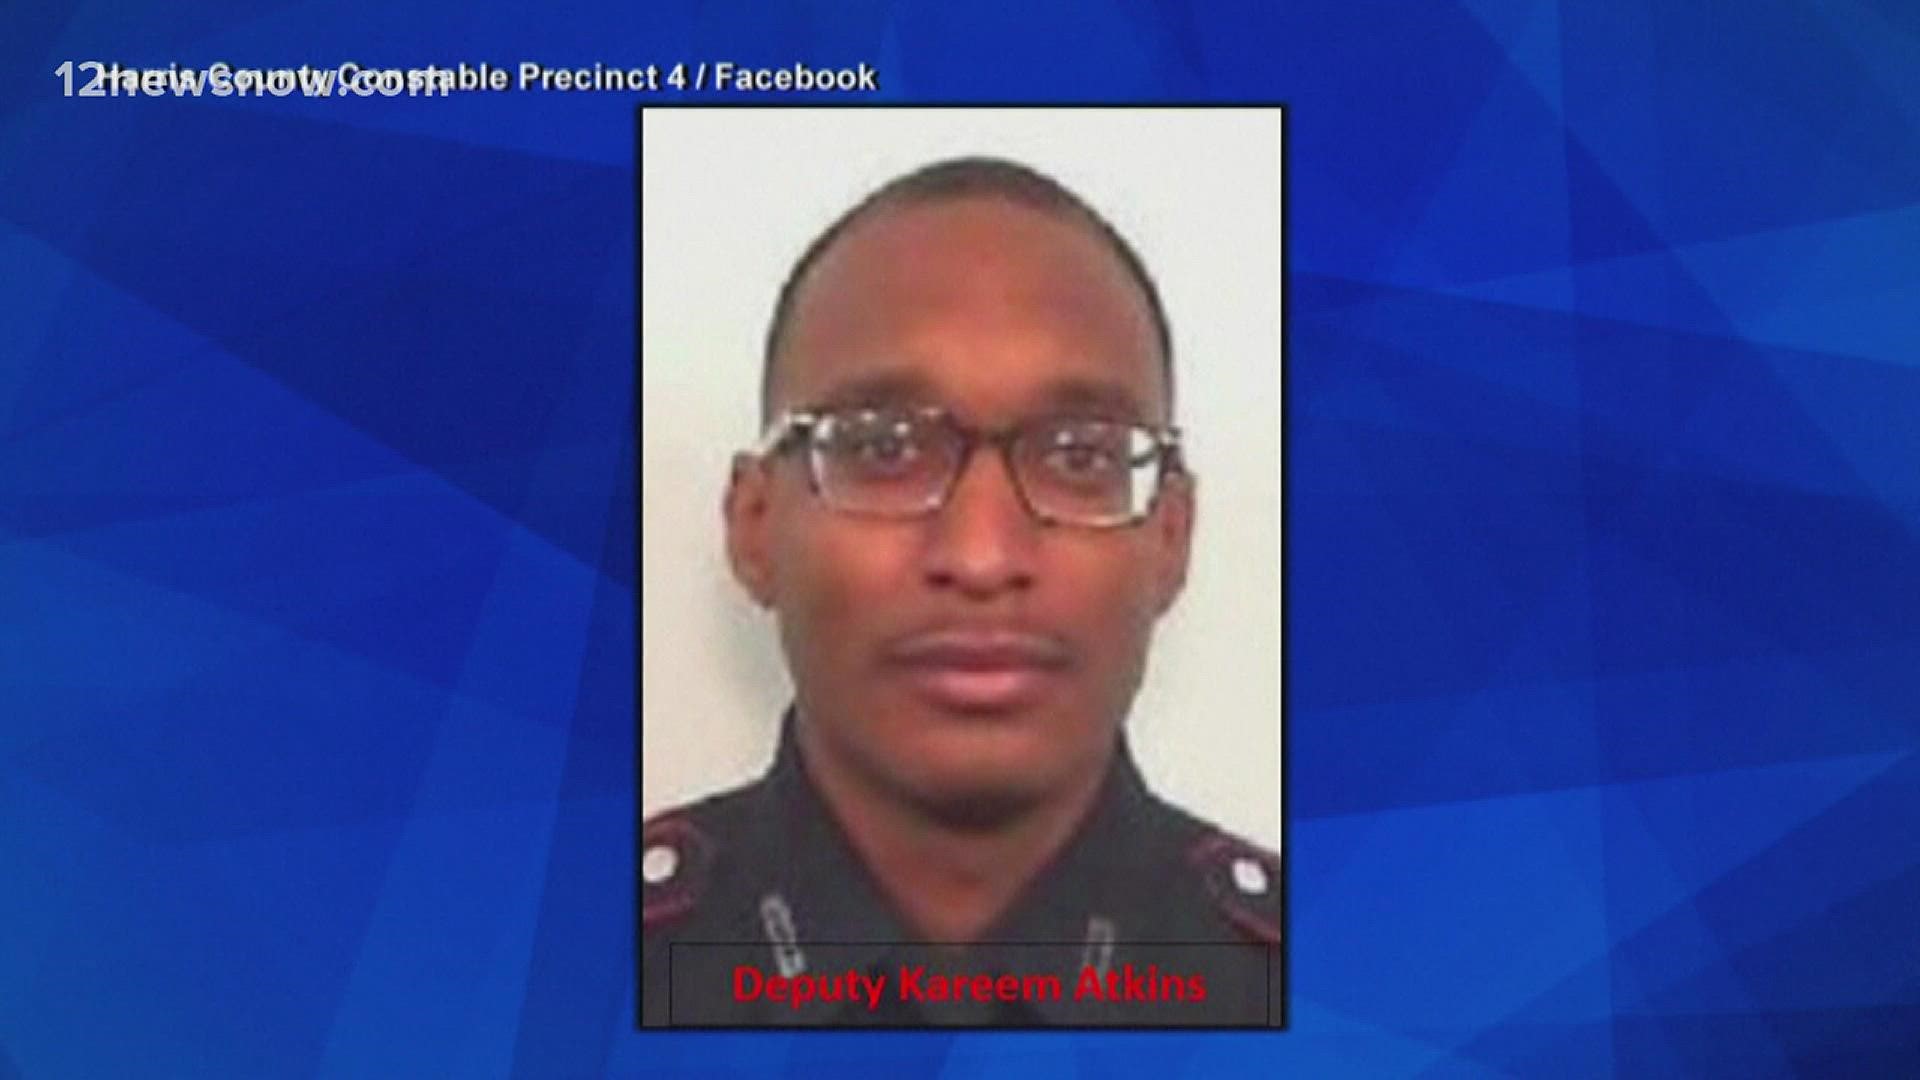 Deputy Kareem Atkins, 30, lost his life. He leaves behind a wife and a 2-month-old baby.